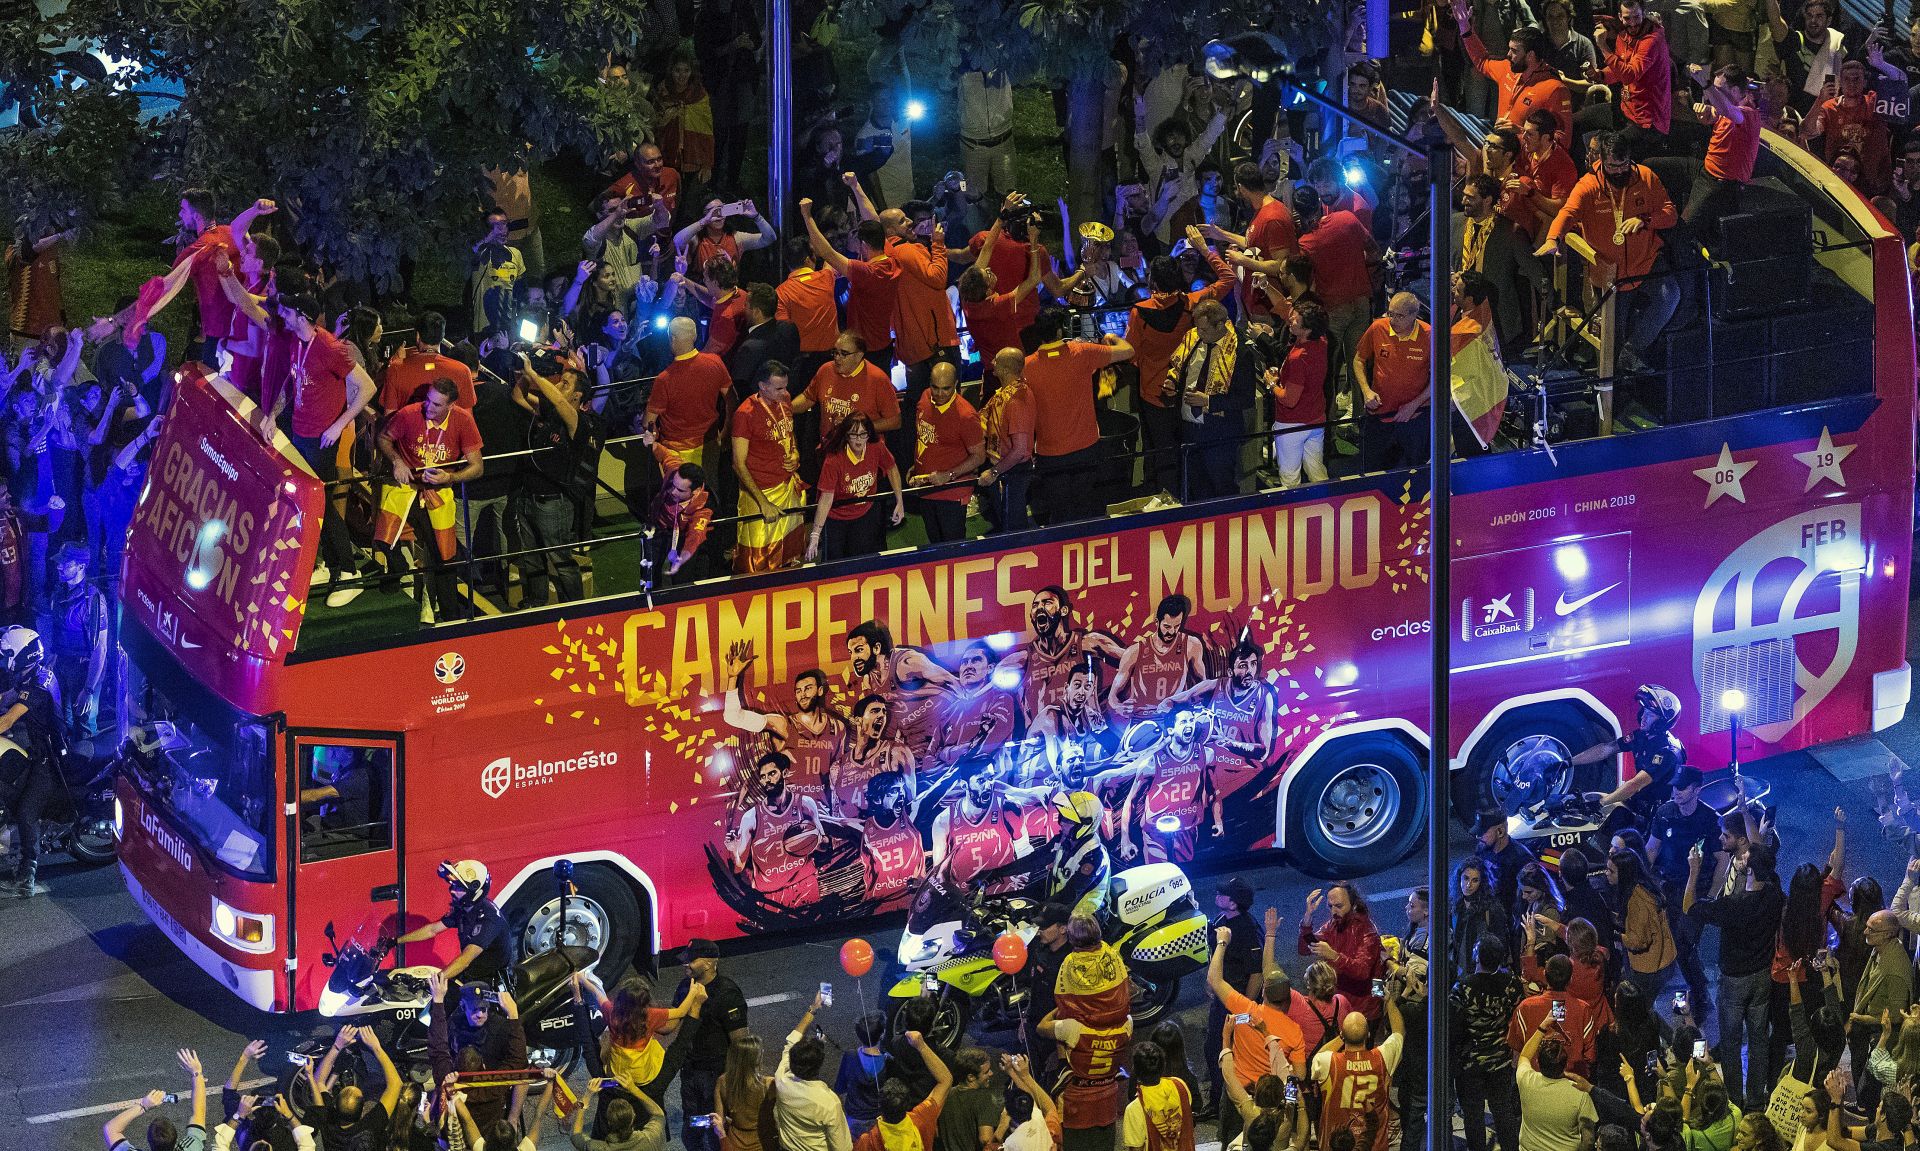 epa07847561 Spain's national basketball team bus arrives at Colon square during the celebration after winning the FIBA basketball World Cup in Madrid, Spain, 16 September 2019. Spain won the FIBA Basketball World Cup final against Argentina in Beijing, China on 15 September 2019.  EPA/EMILIO NARANJO